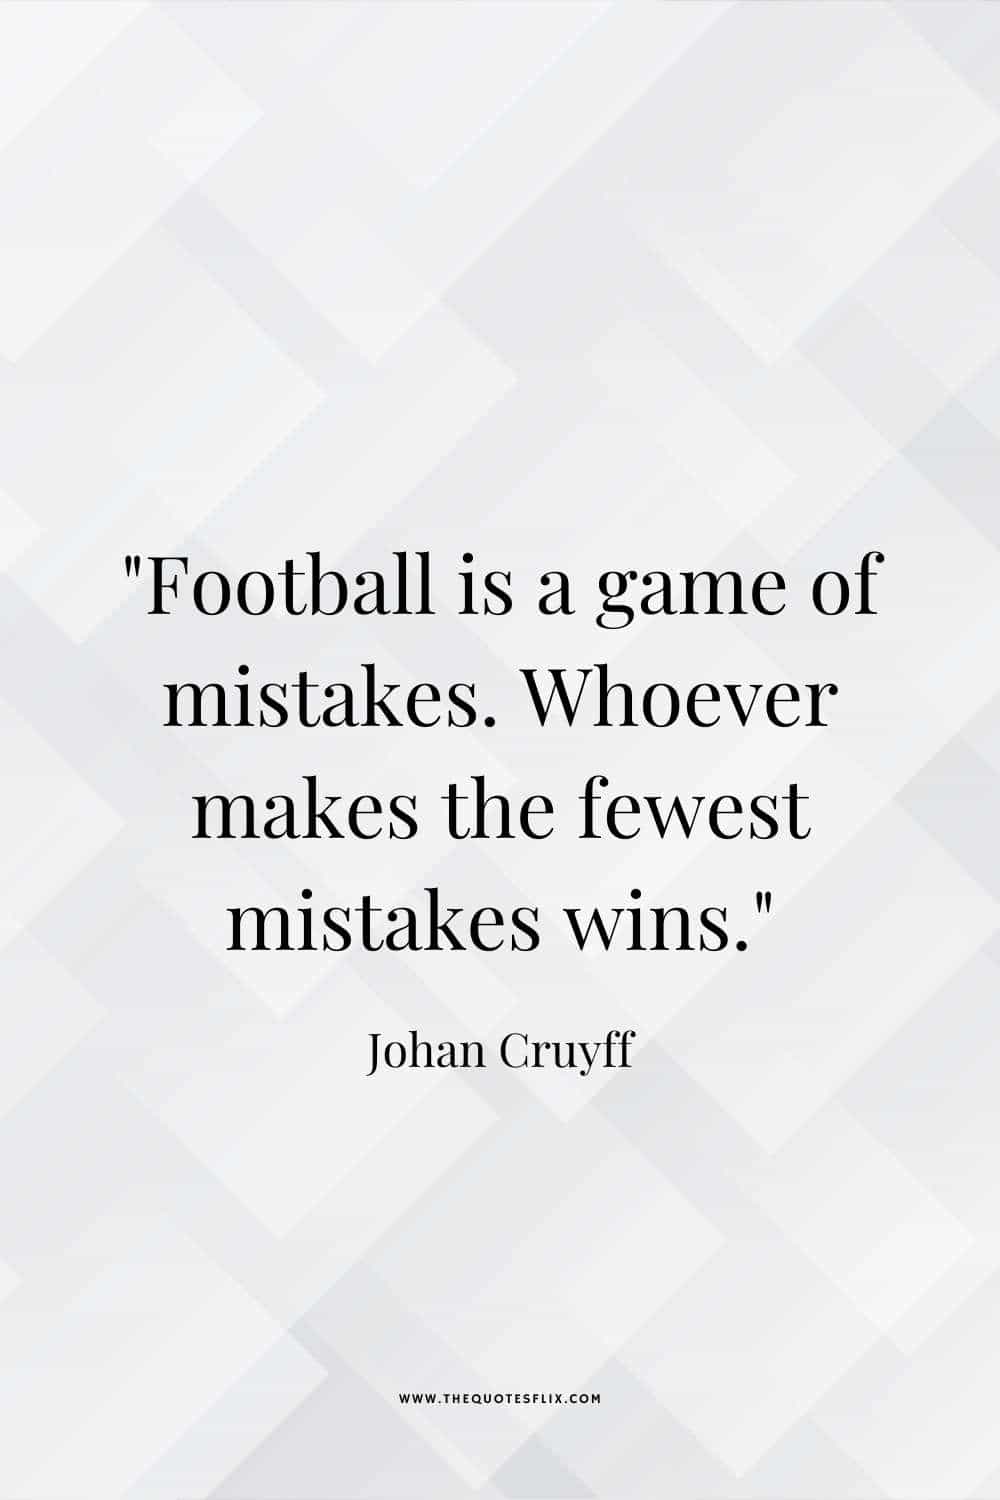 inspirational football quotes - football is game of mistakes fewest mistakes win